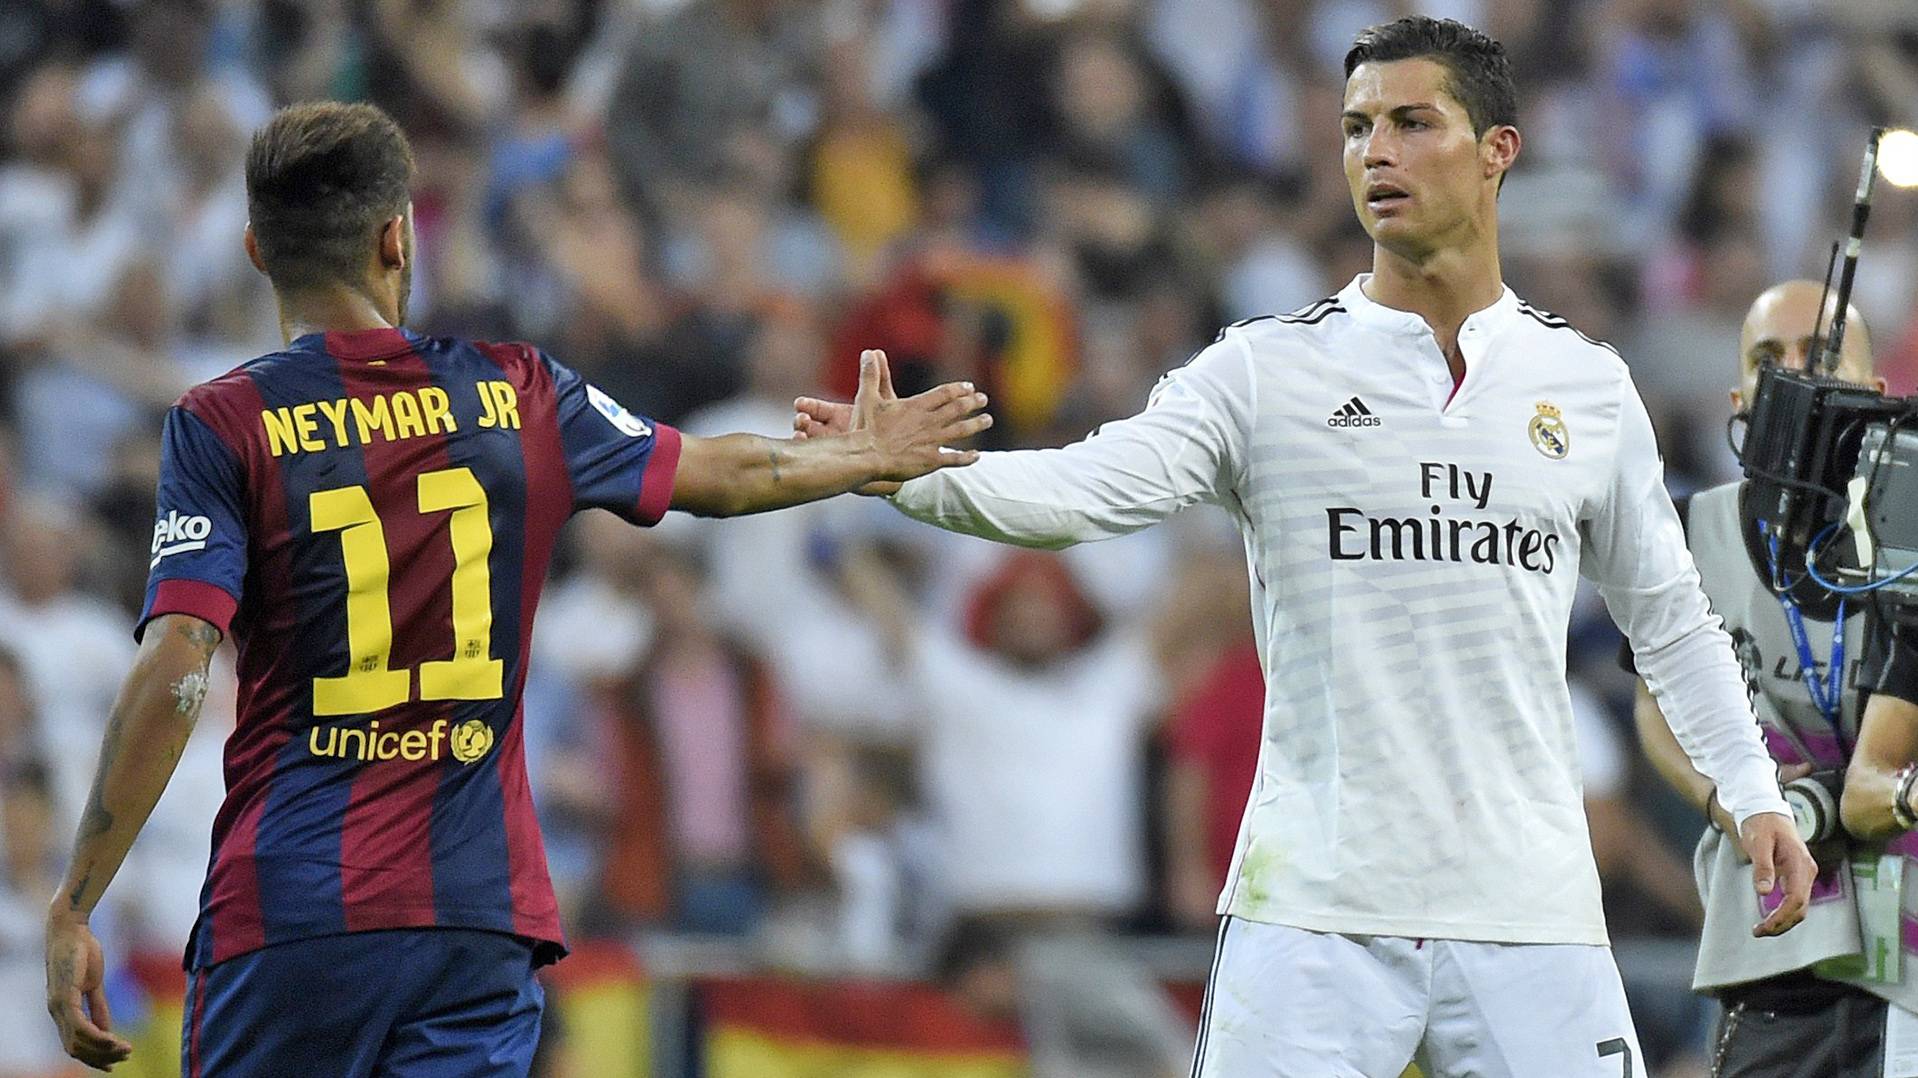 Neymar And Cristiano, greeting in the last Classical of 2014